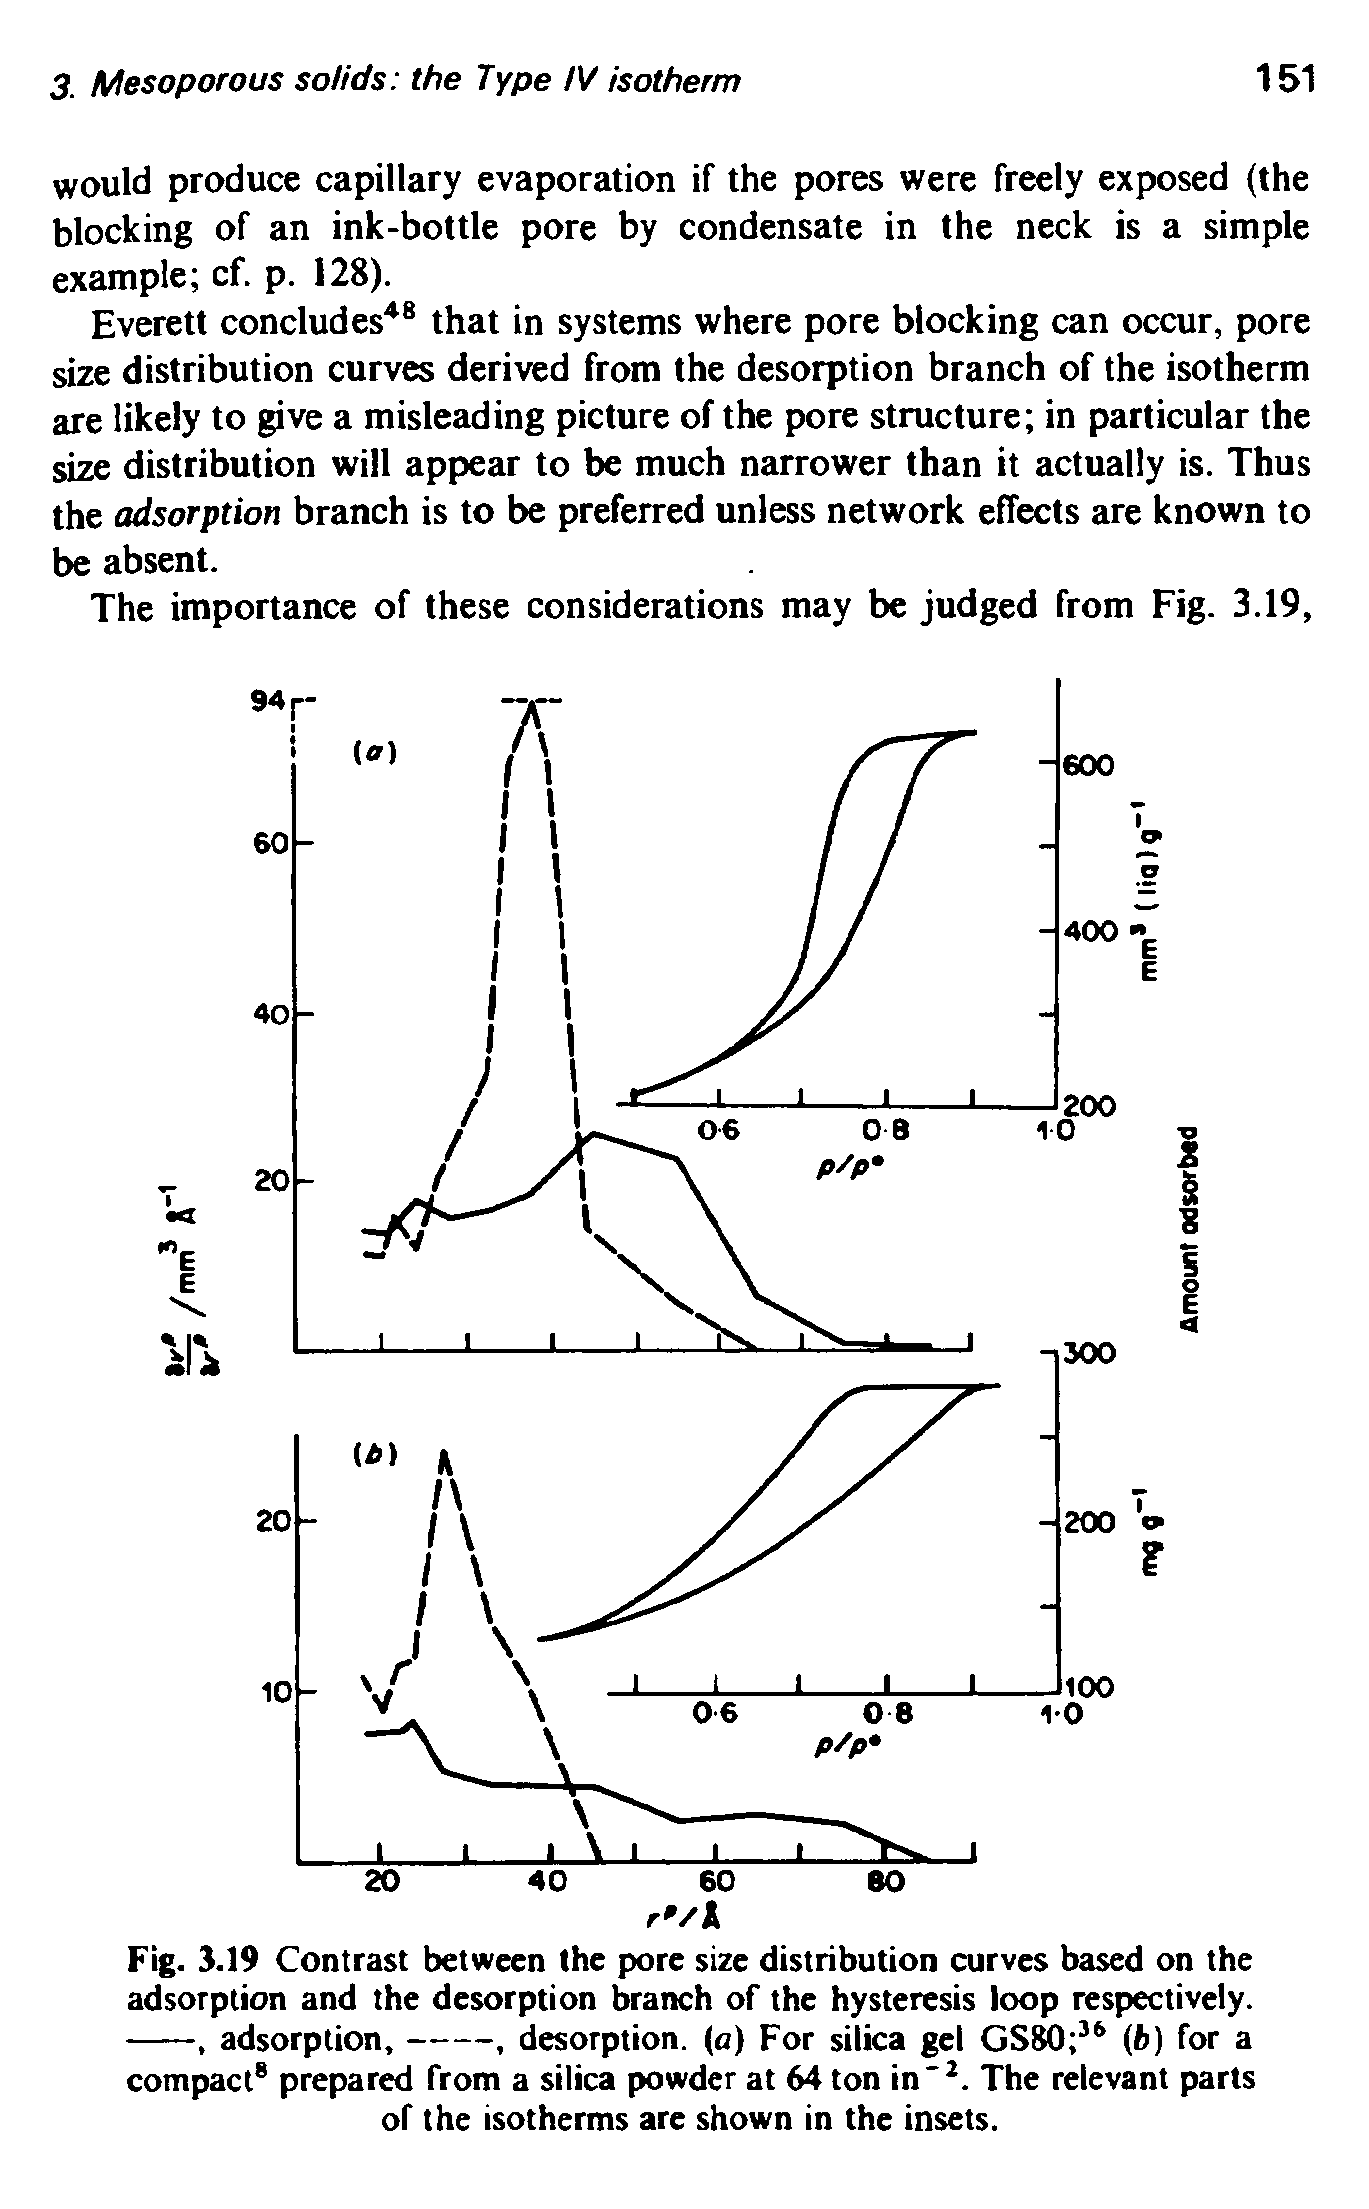 Fig. 3.19 Contrast between the pore size distribution curves based on the adsorption and the desorption branch of the hysteresis loop respectively.